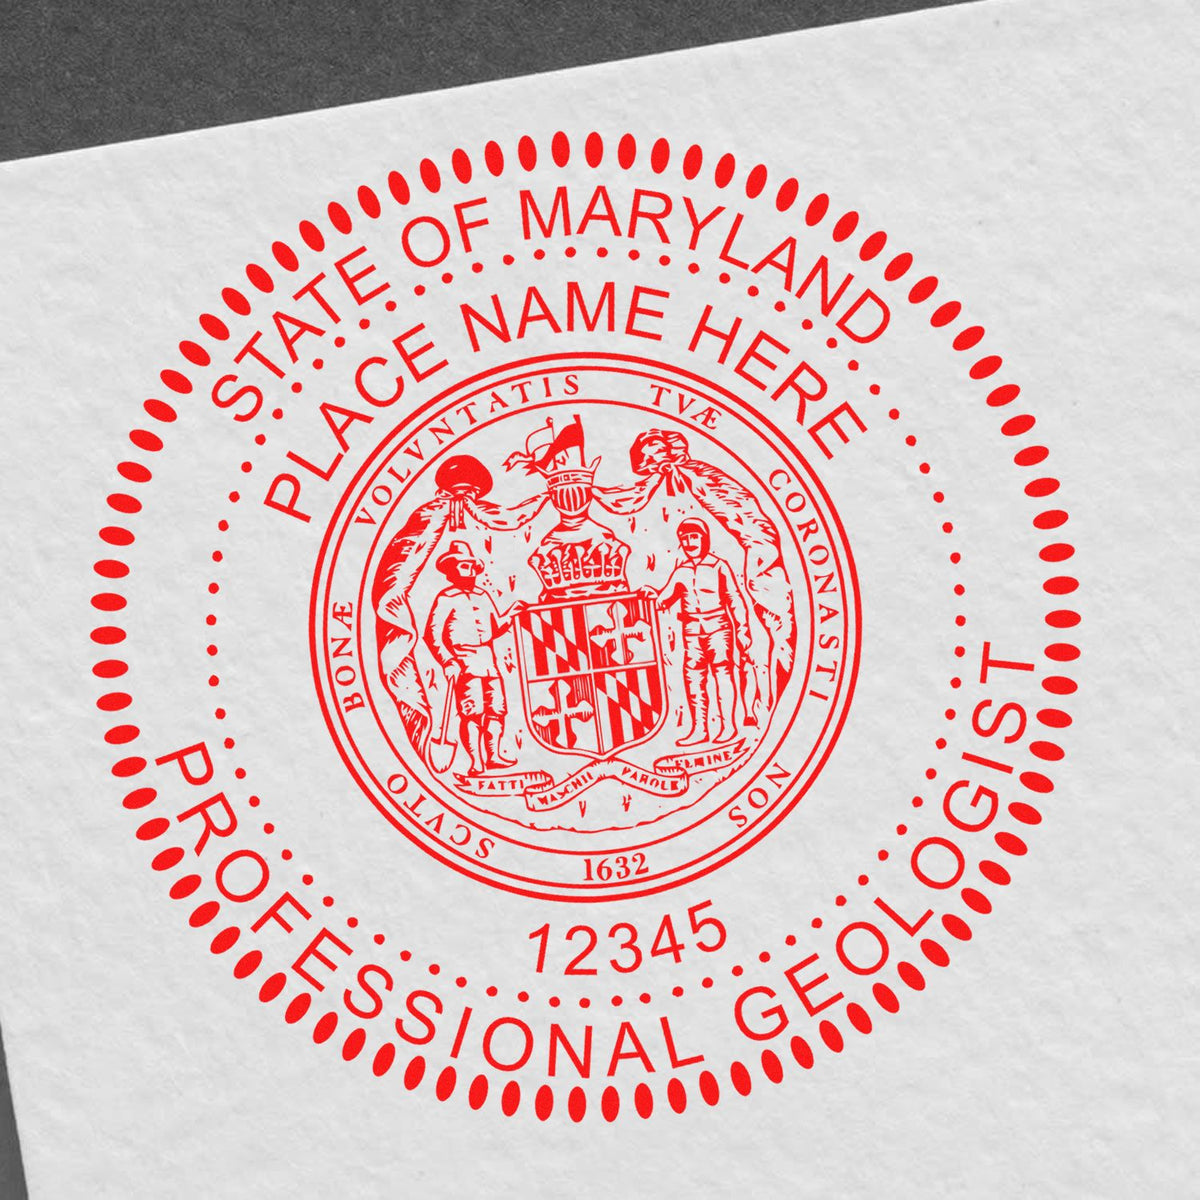 The Premium MaxLight Pre-Inked Maryland Geology Stamp stamp impression comes to life with a crisp, detailed image stamped on paper - showcasing true professional quality.